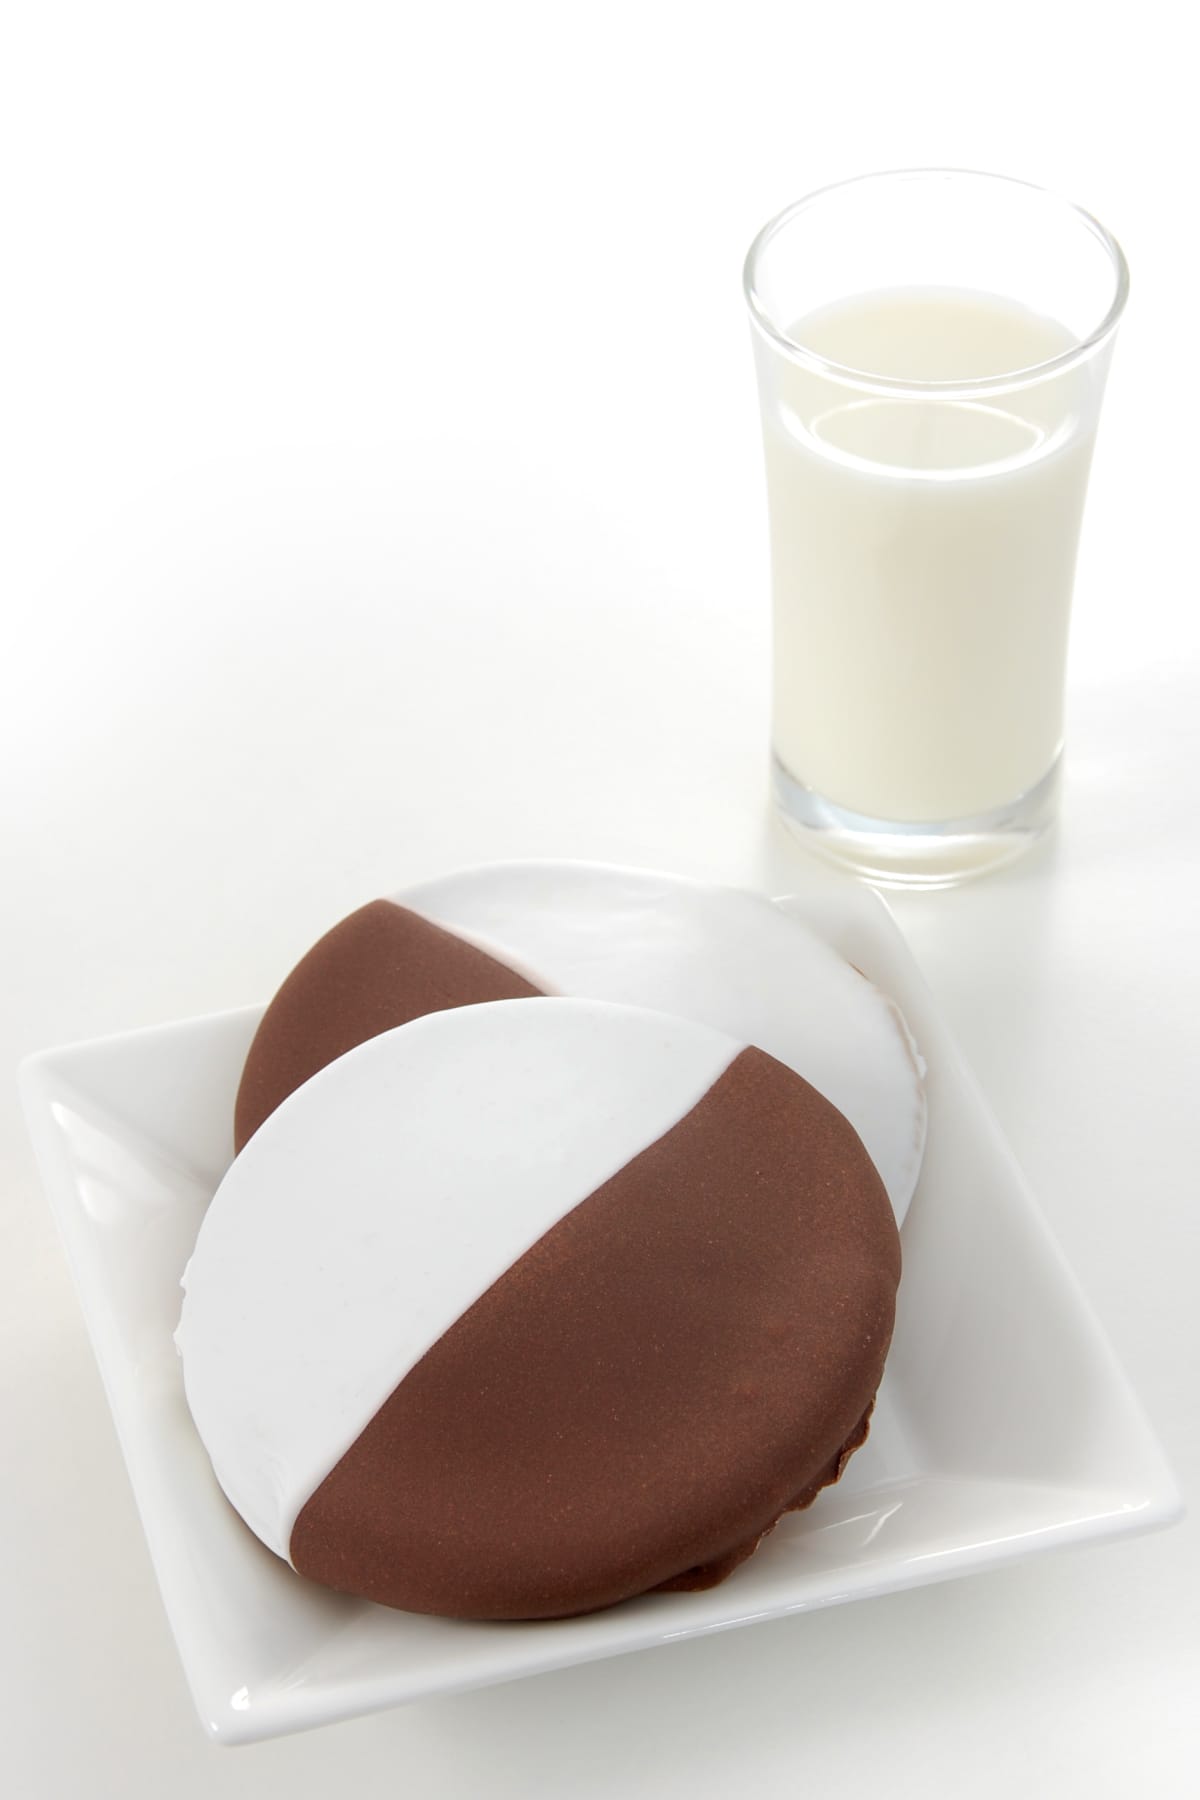 Two "half-moons" or "black and white" cookies frosted with chocolate and vanilla fondant, served with a glass of milk.